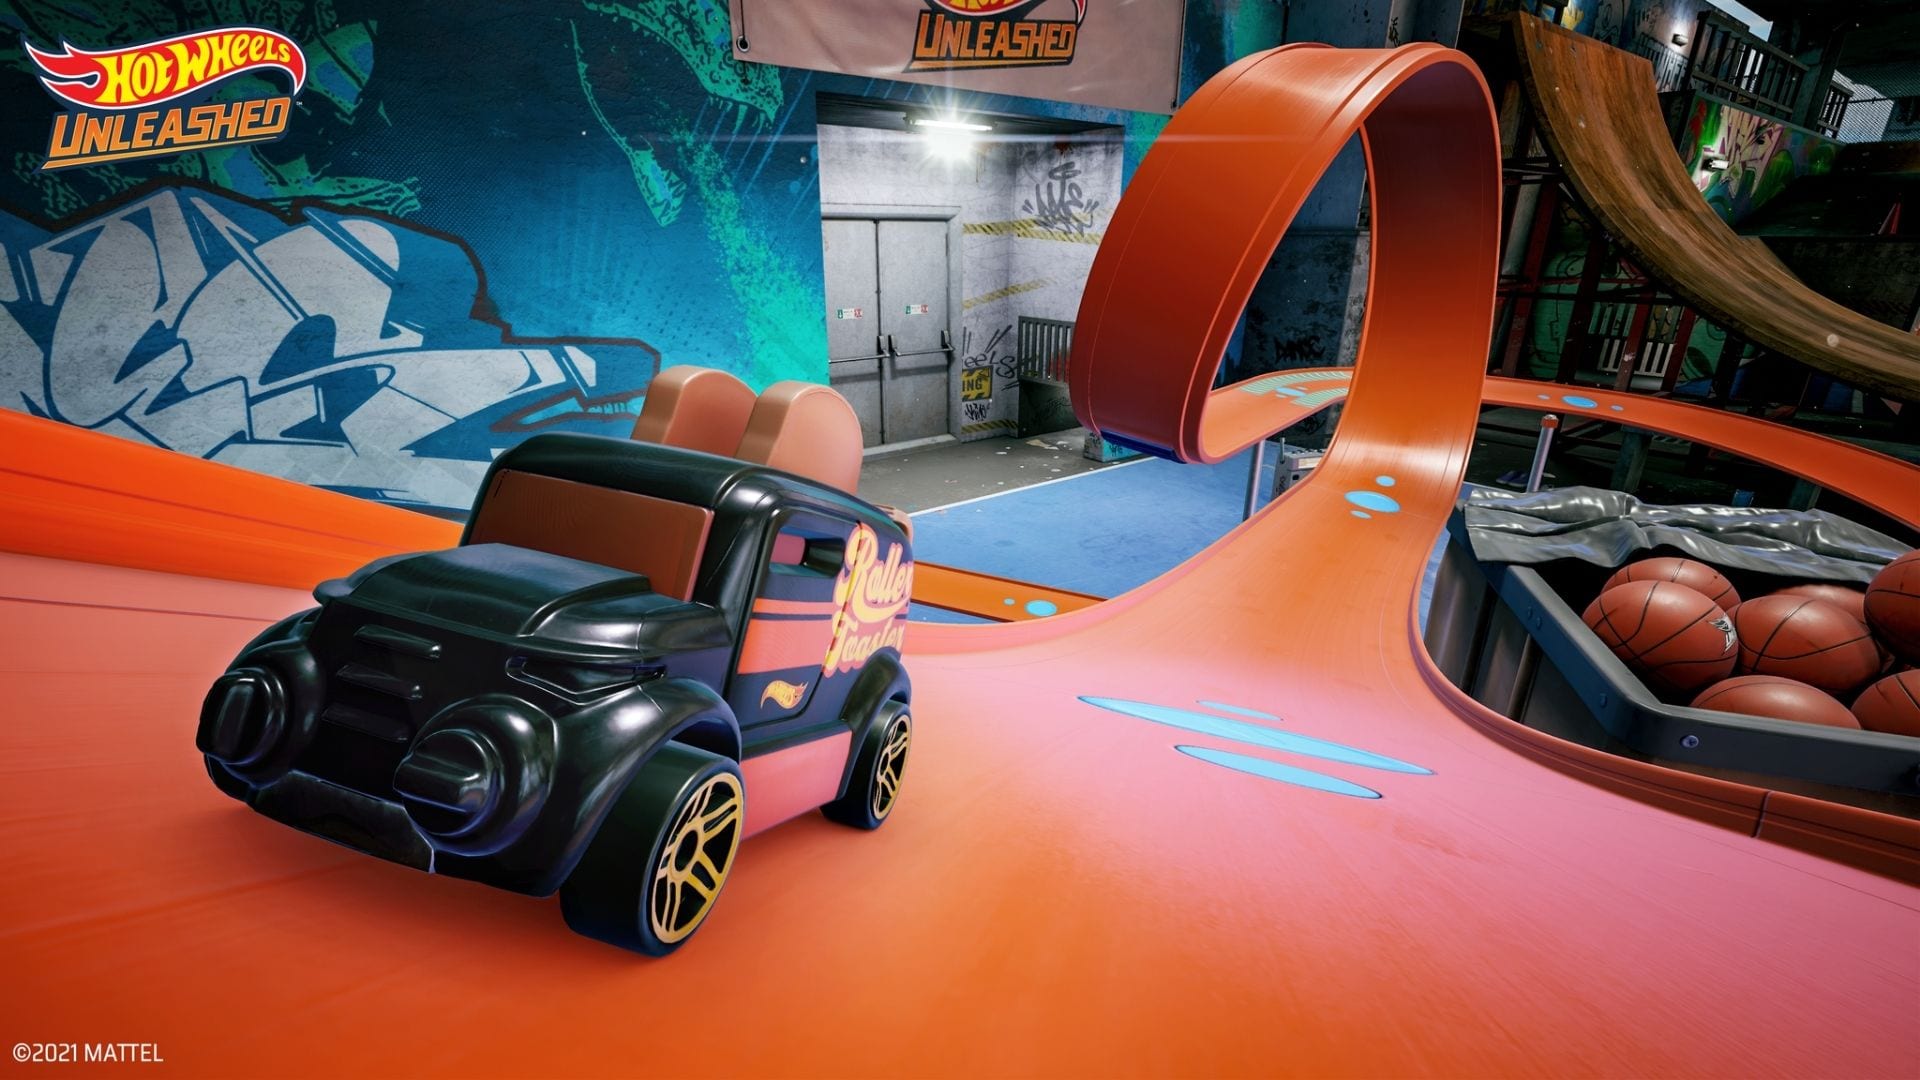 Preview: Hot Wheels Unleashed